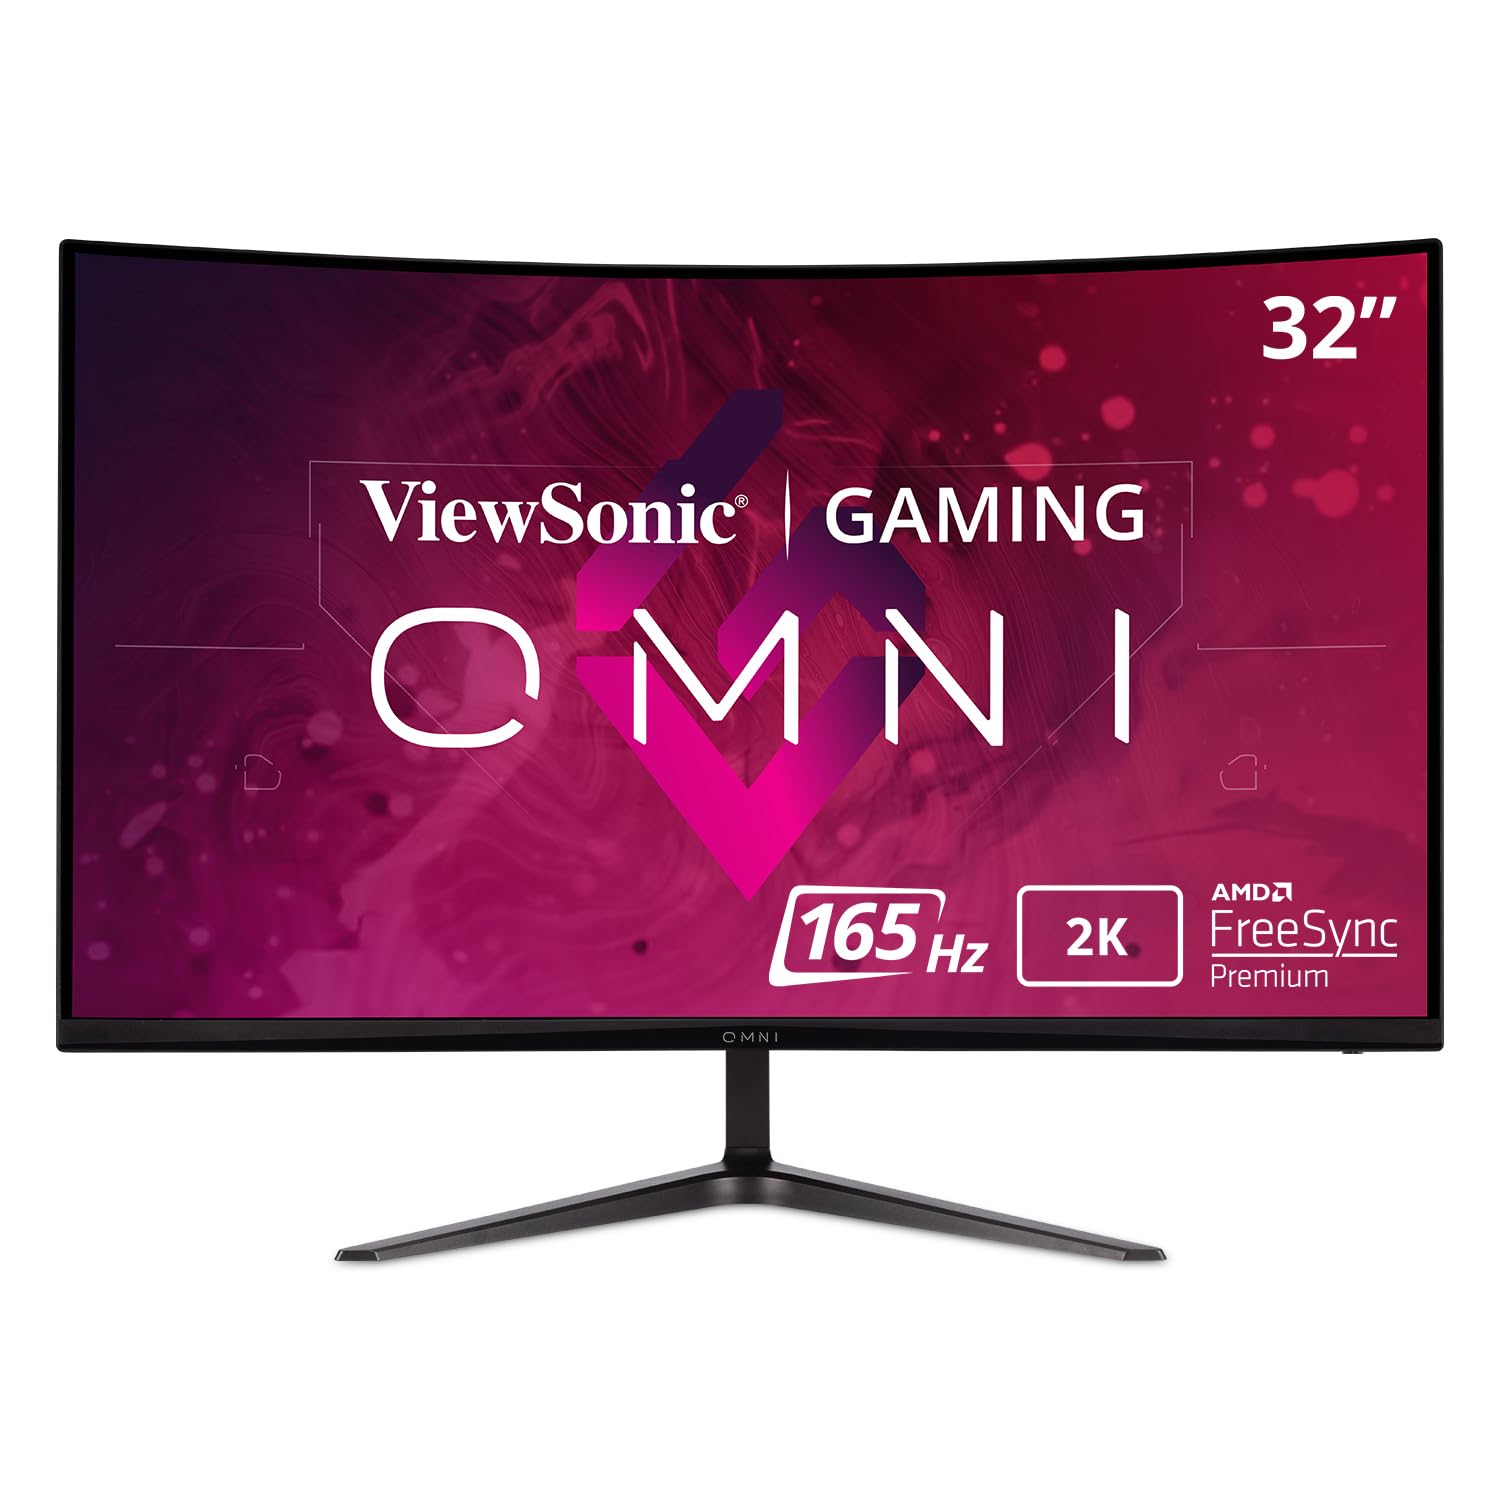 ViewSonic Omni VX3218C-2K 32 Inch Curved 1ms 1440p 165hz Gaming Monitor with FreeSync Premium, Eye Care, HDMI and Display Port, Black